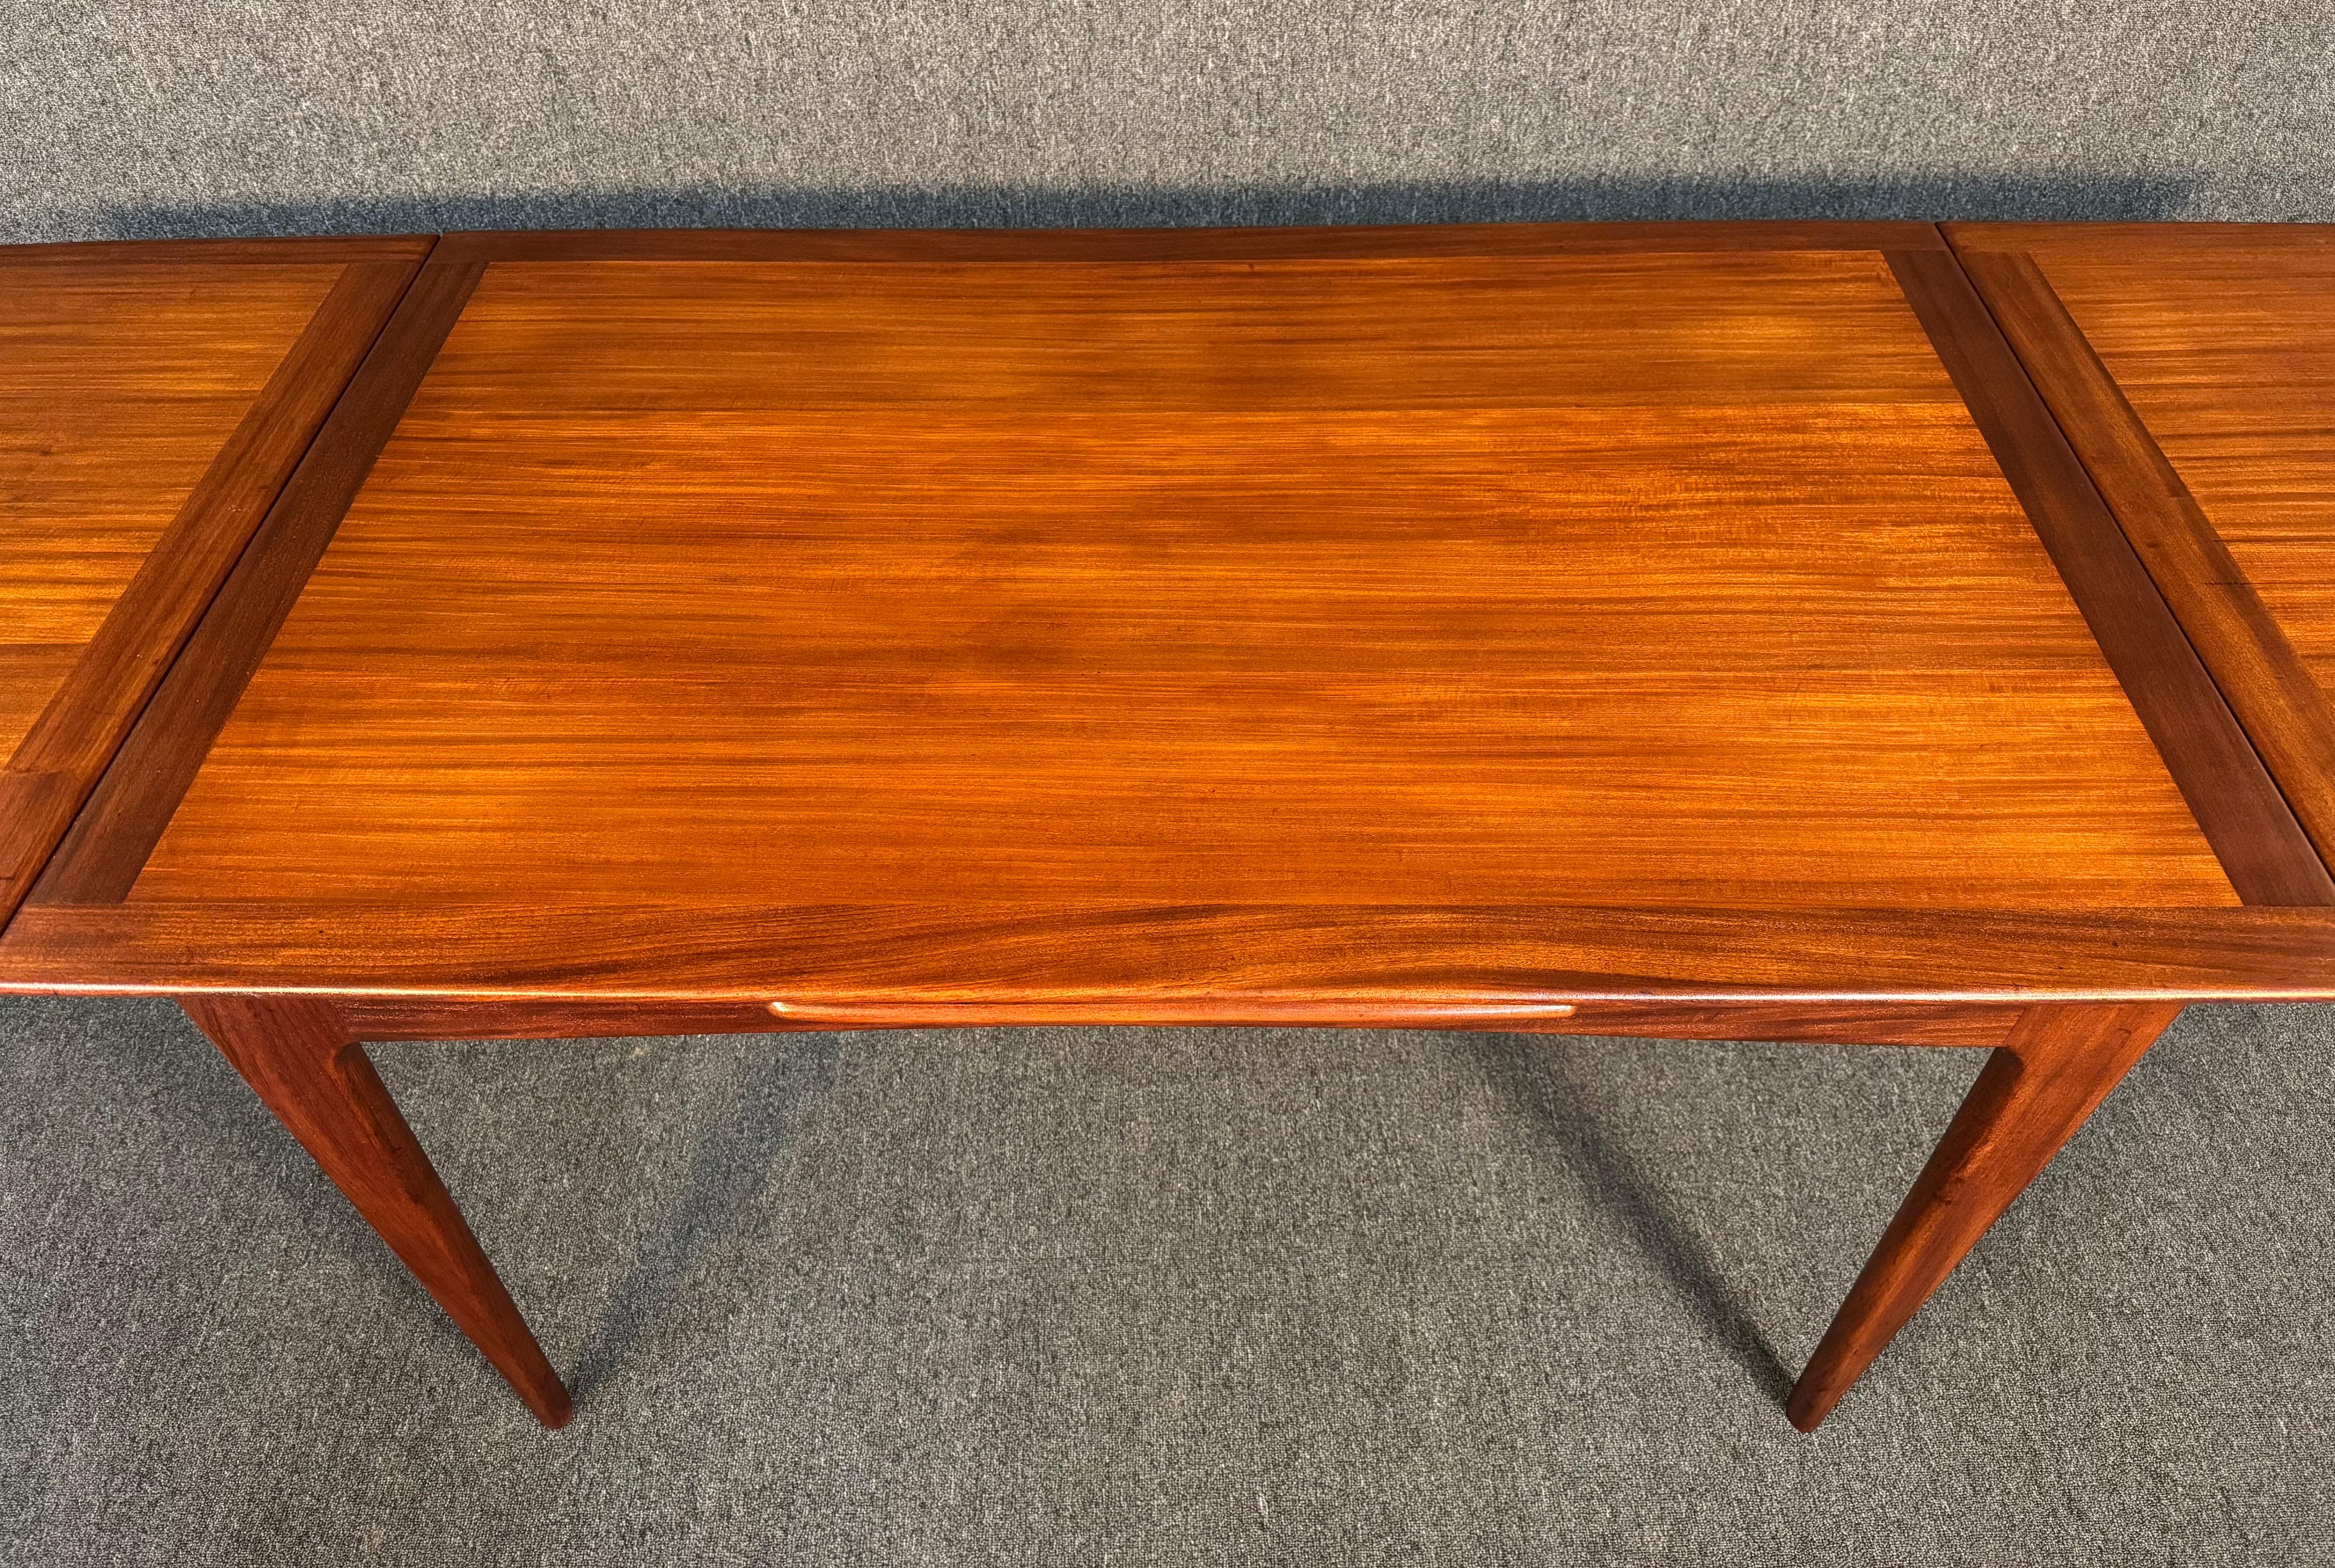 Vintage British Mid Century Modern Afromasia Teak Dining Table by A. Younger Ltd For Sale 2